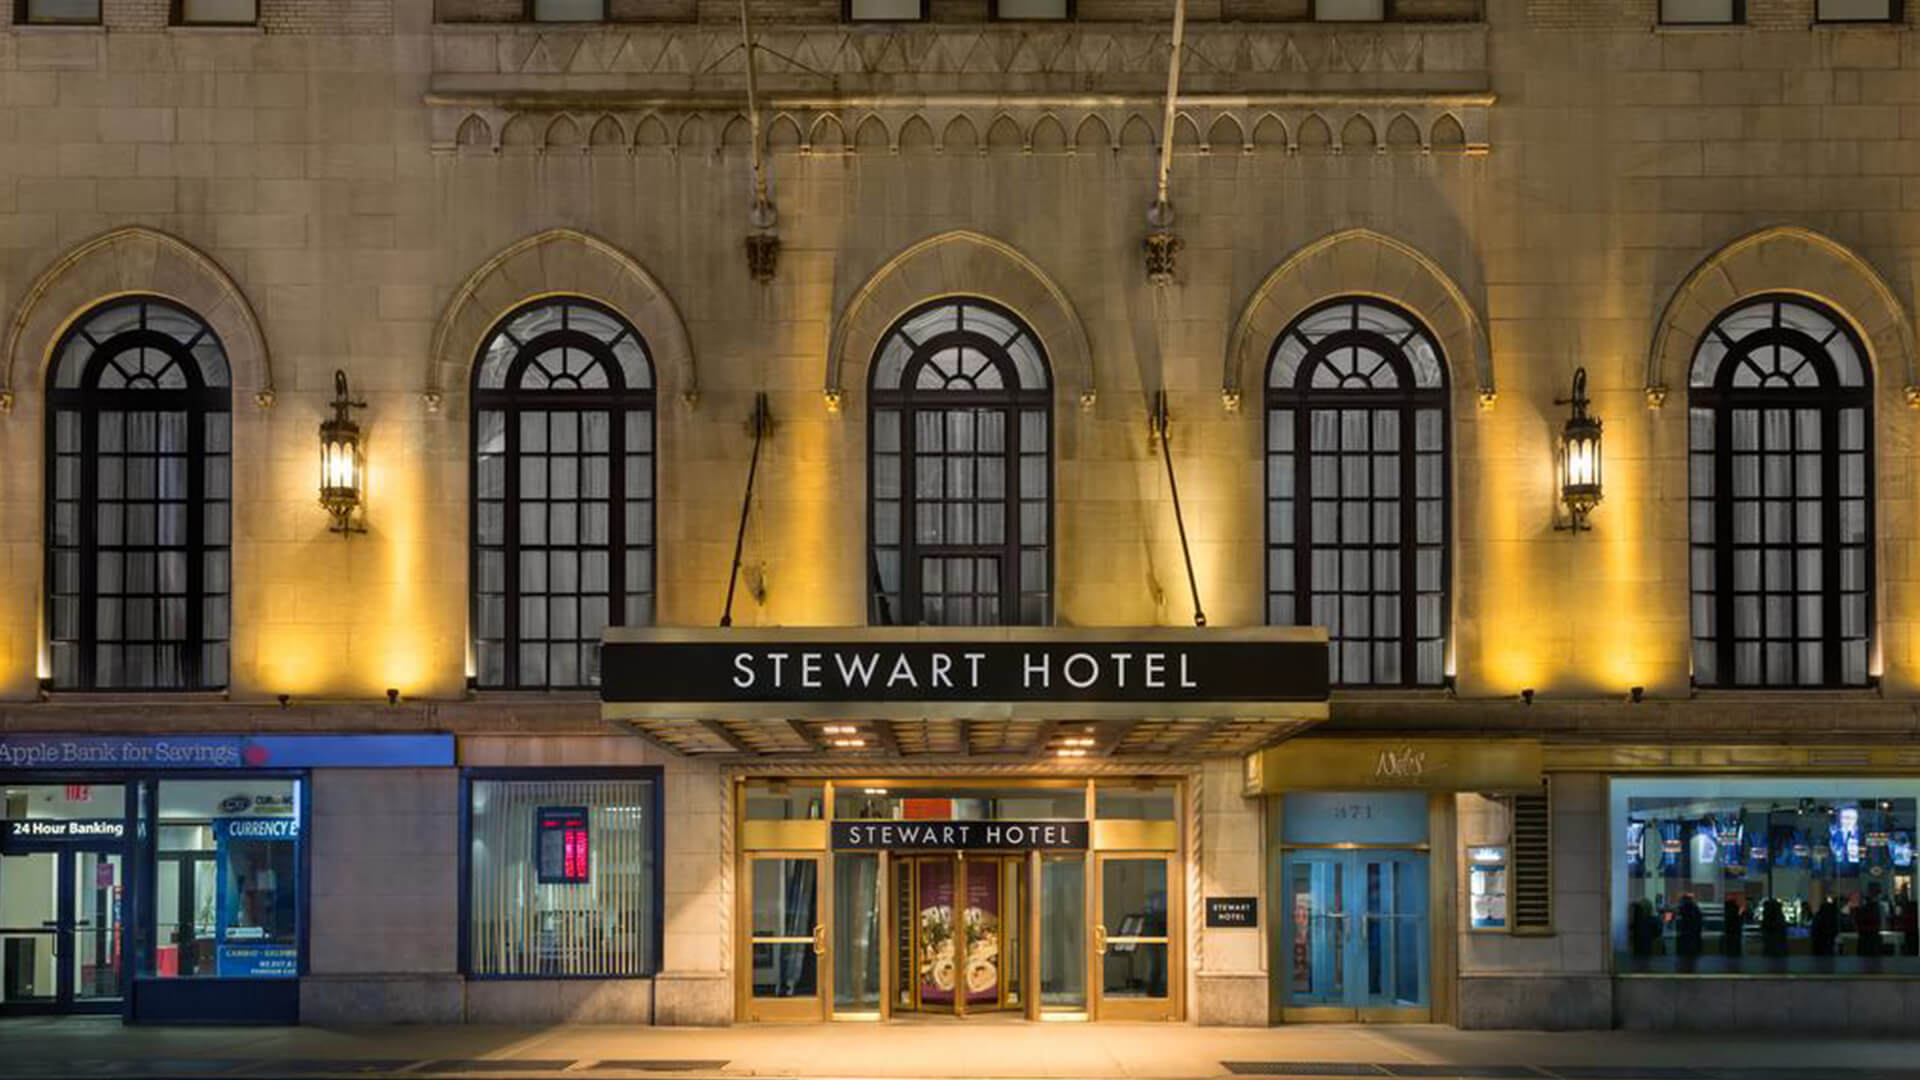 The Stewart Hotel's entrance illuminated by warm lights at night, showcasing its elegant architecture and welcoming atmosphere.